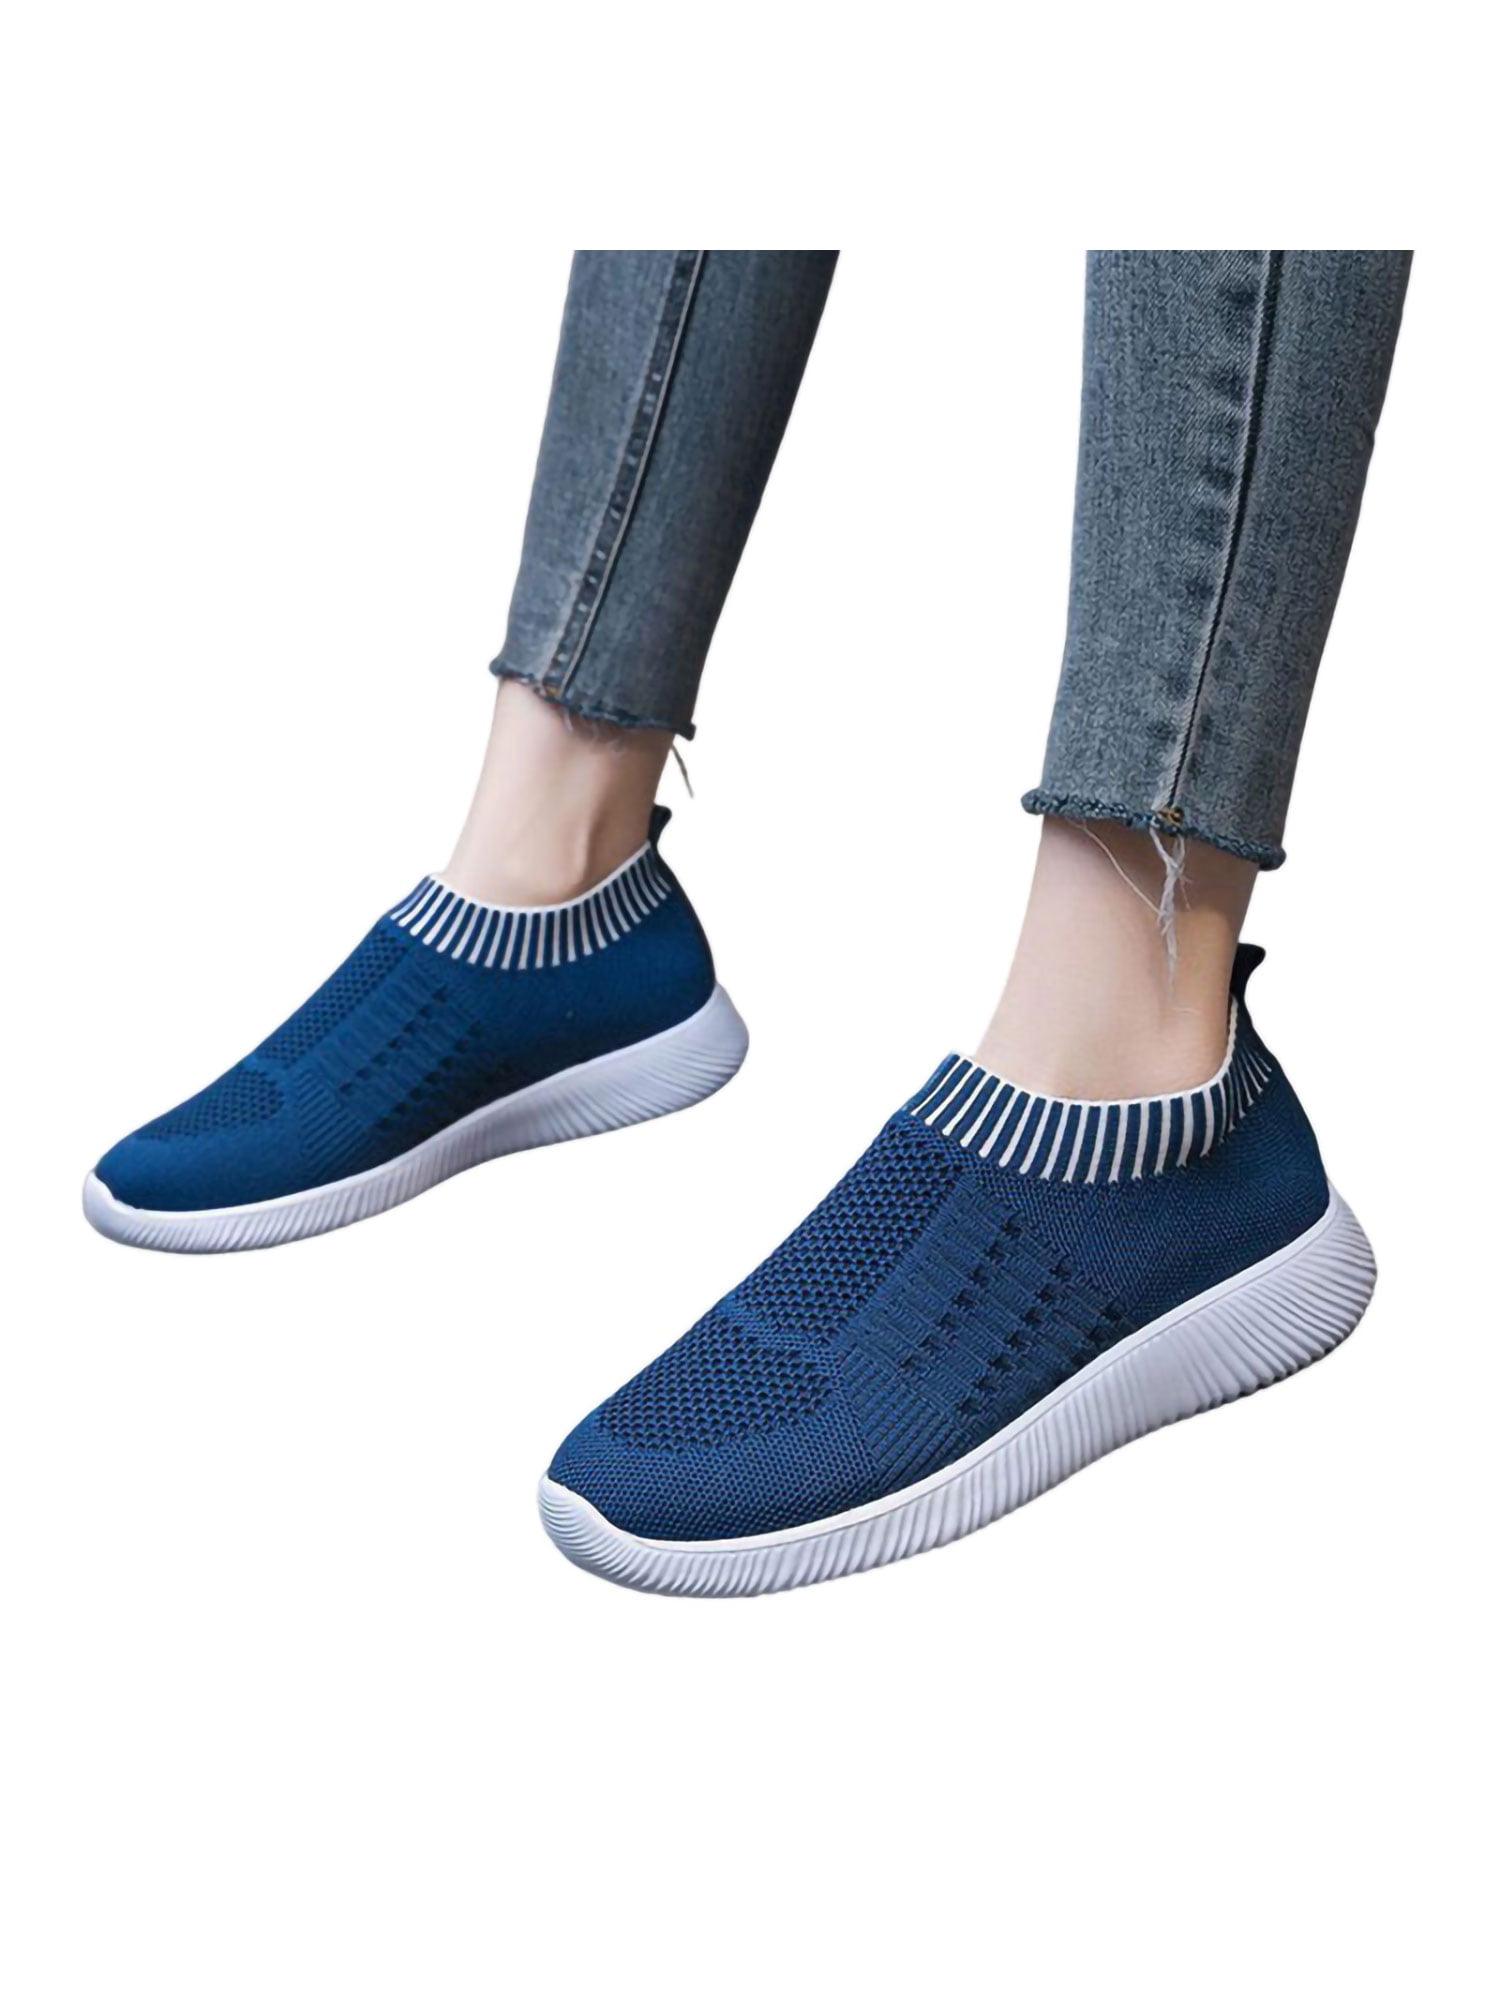 Women Sneakers Breathable Casual Lightweight Sports Running Shoes Slip-on Flats 